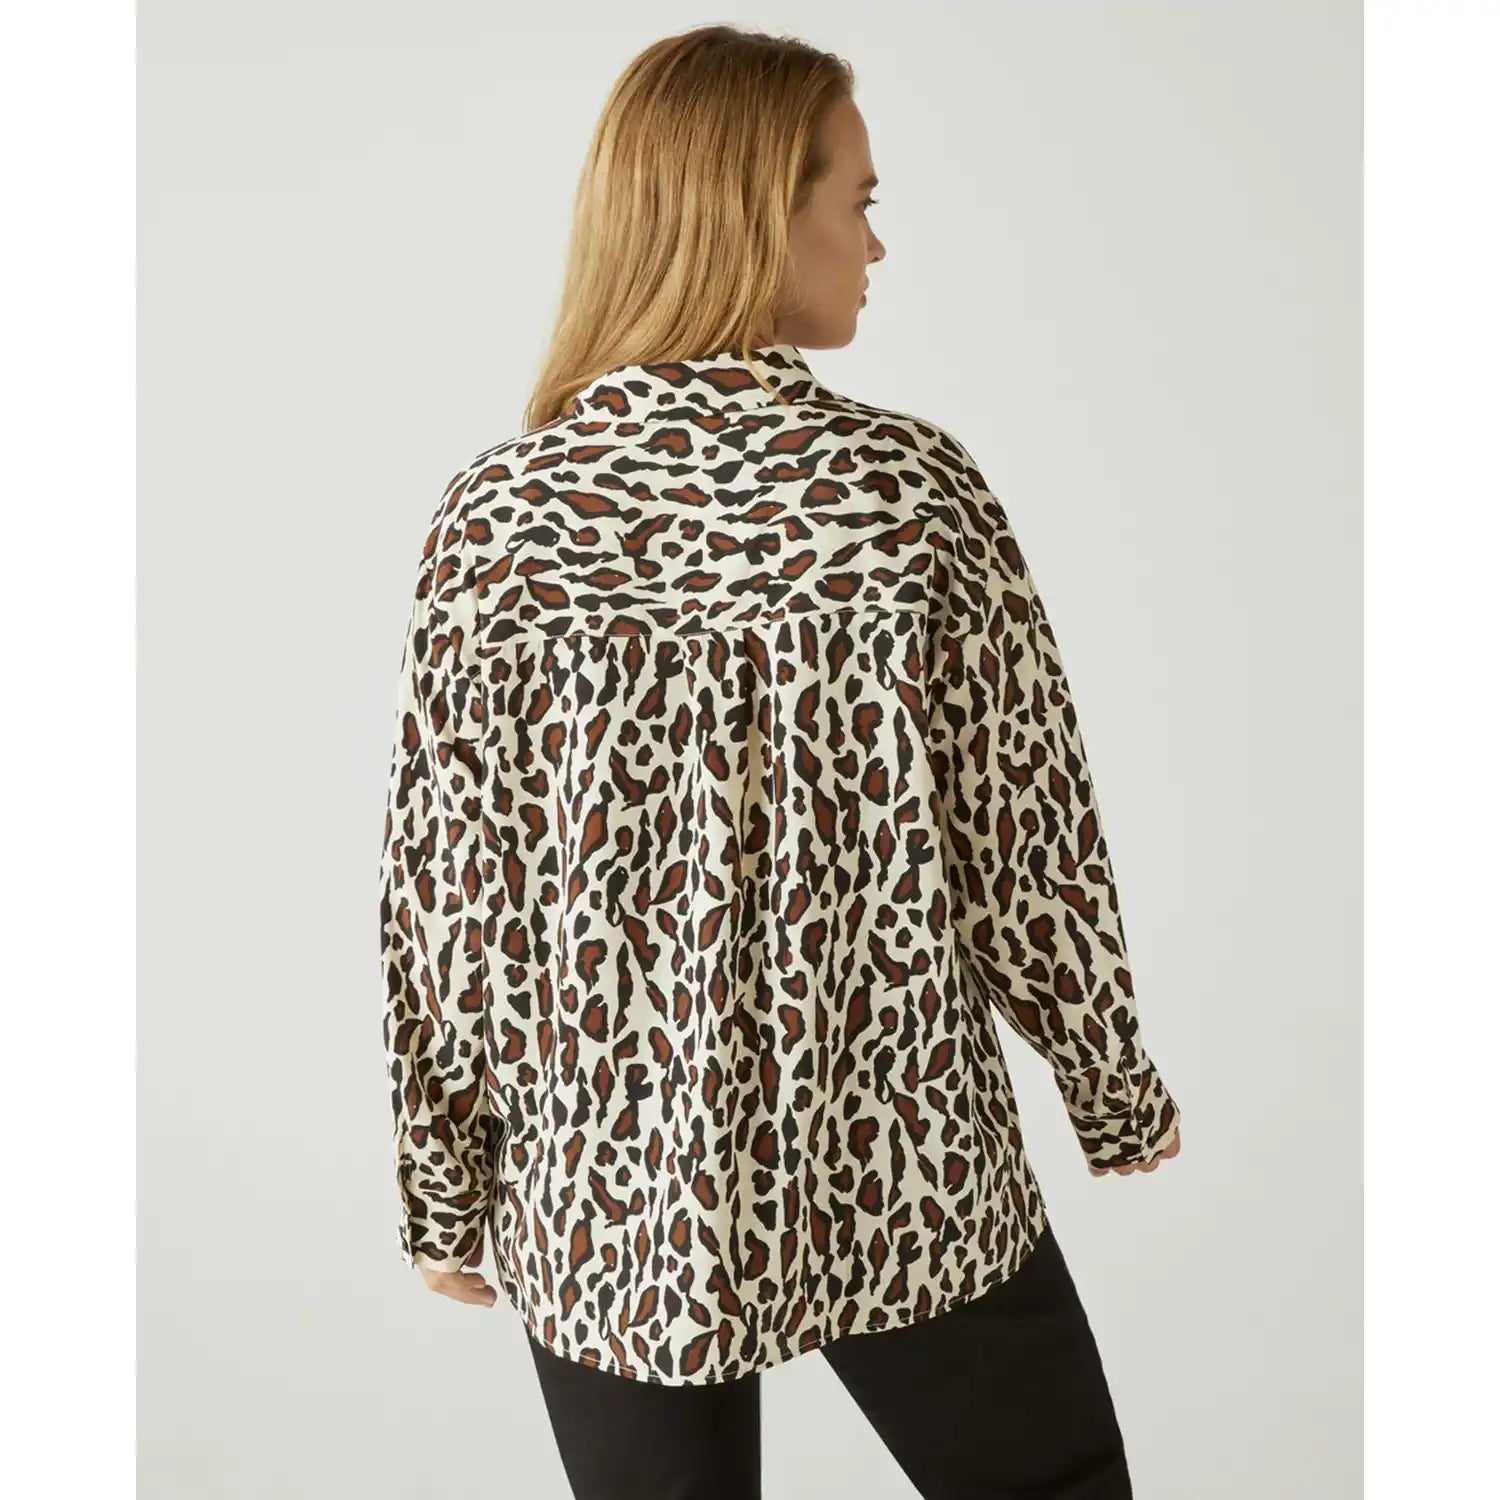 Couchel Animal Print Blouse - Raw 3 Shaws Department Stores